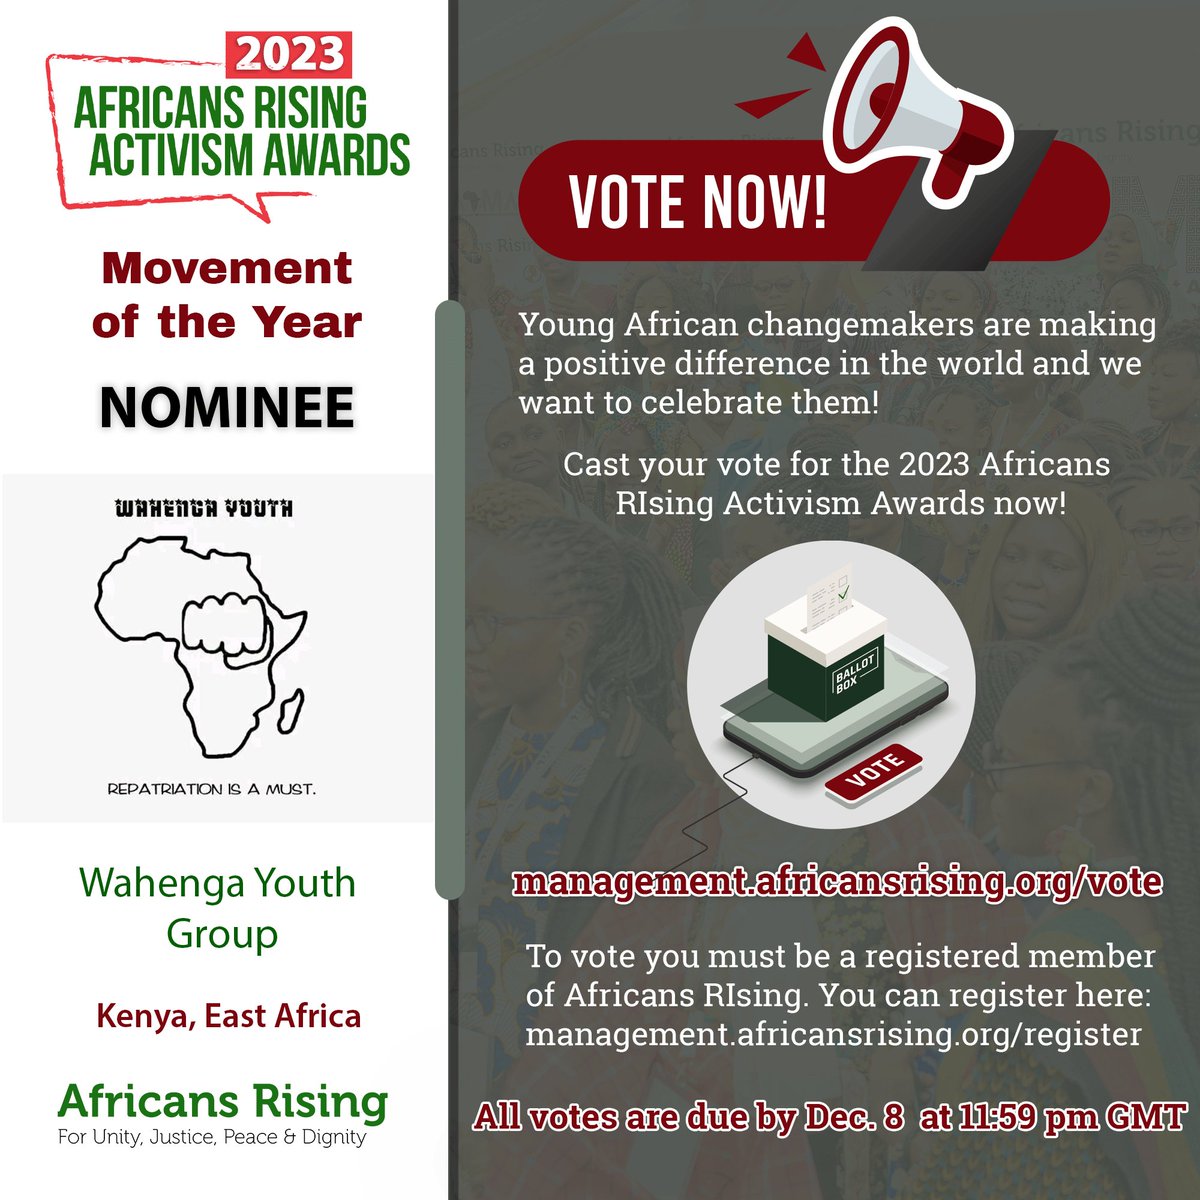 We are Excited to among the Final nominees of the @AfricansRising Rising 2023 Activism Awards movement of the year category. Kindly sign up for Africans Rising membership on the link below then proceed to vote for us. @DonKreartives @AngazaNoth @Pawa254 africansrising.org